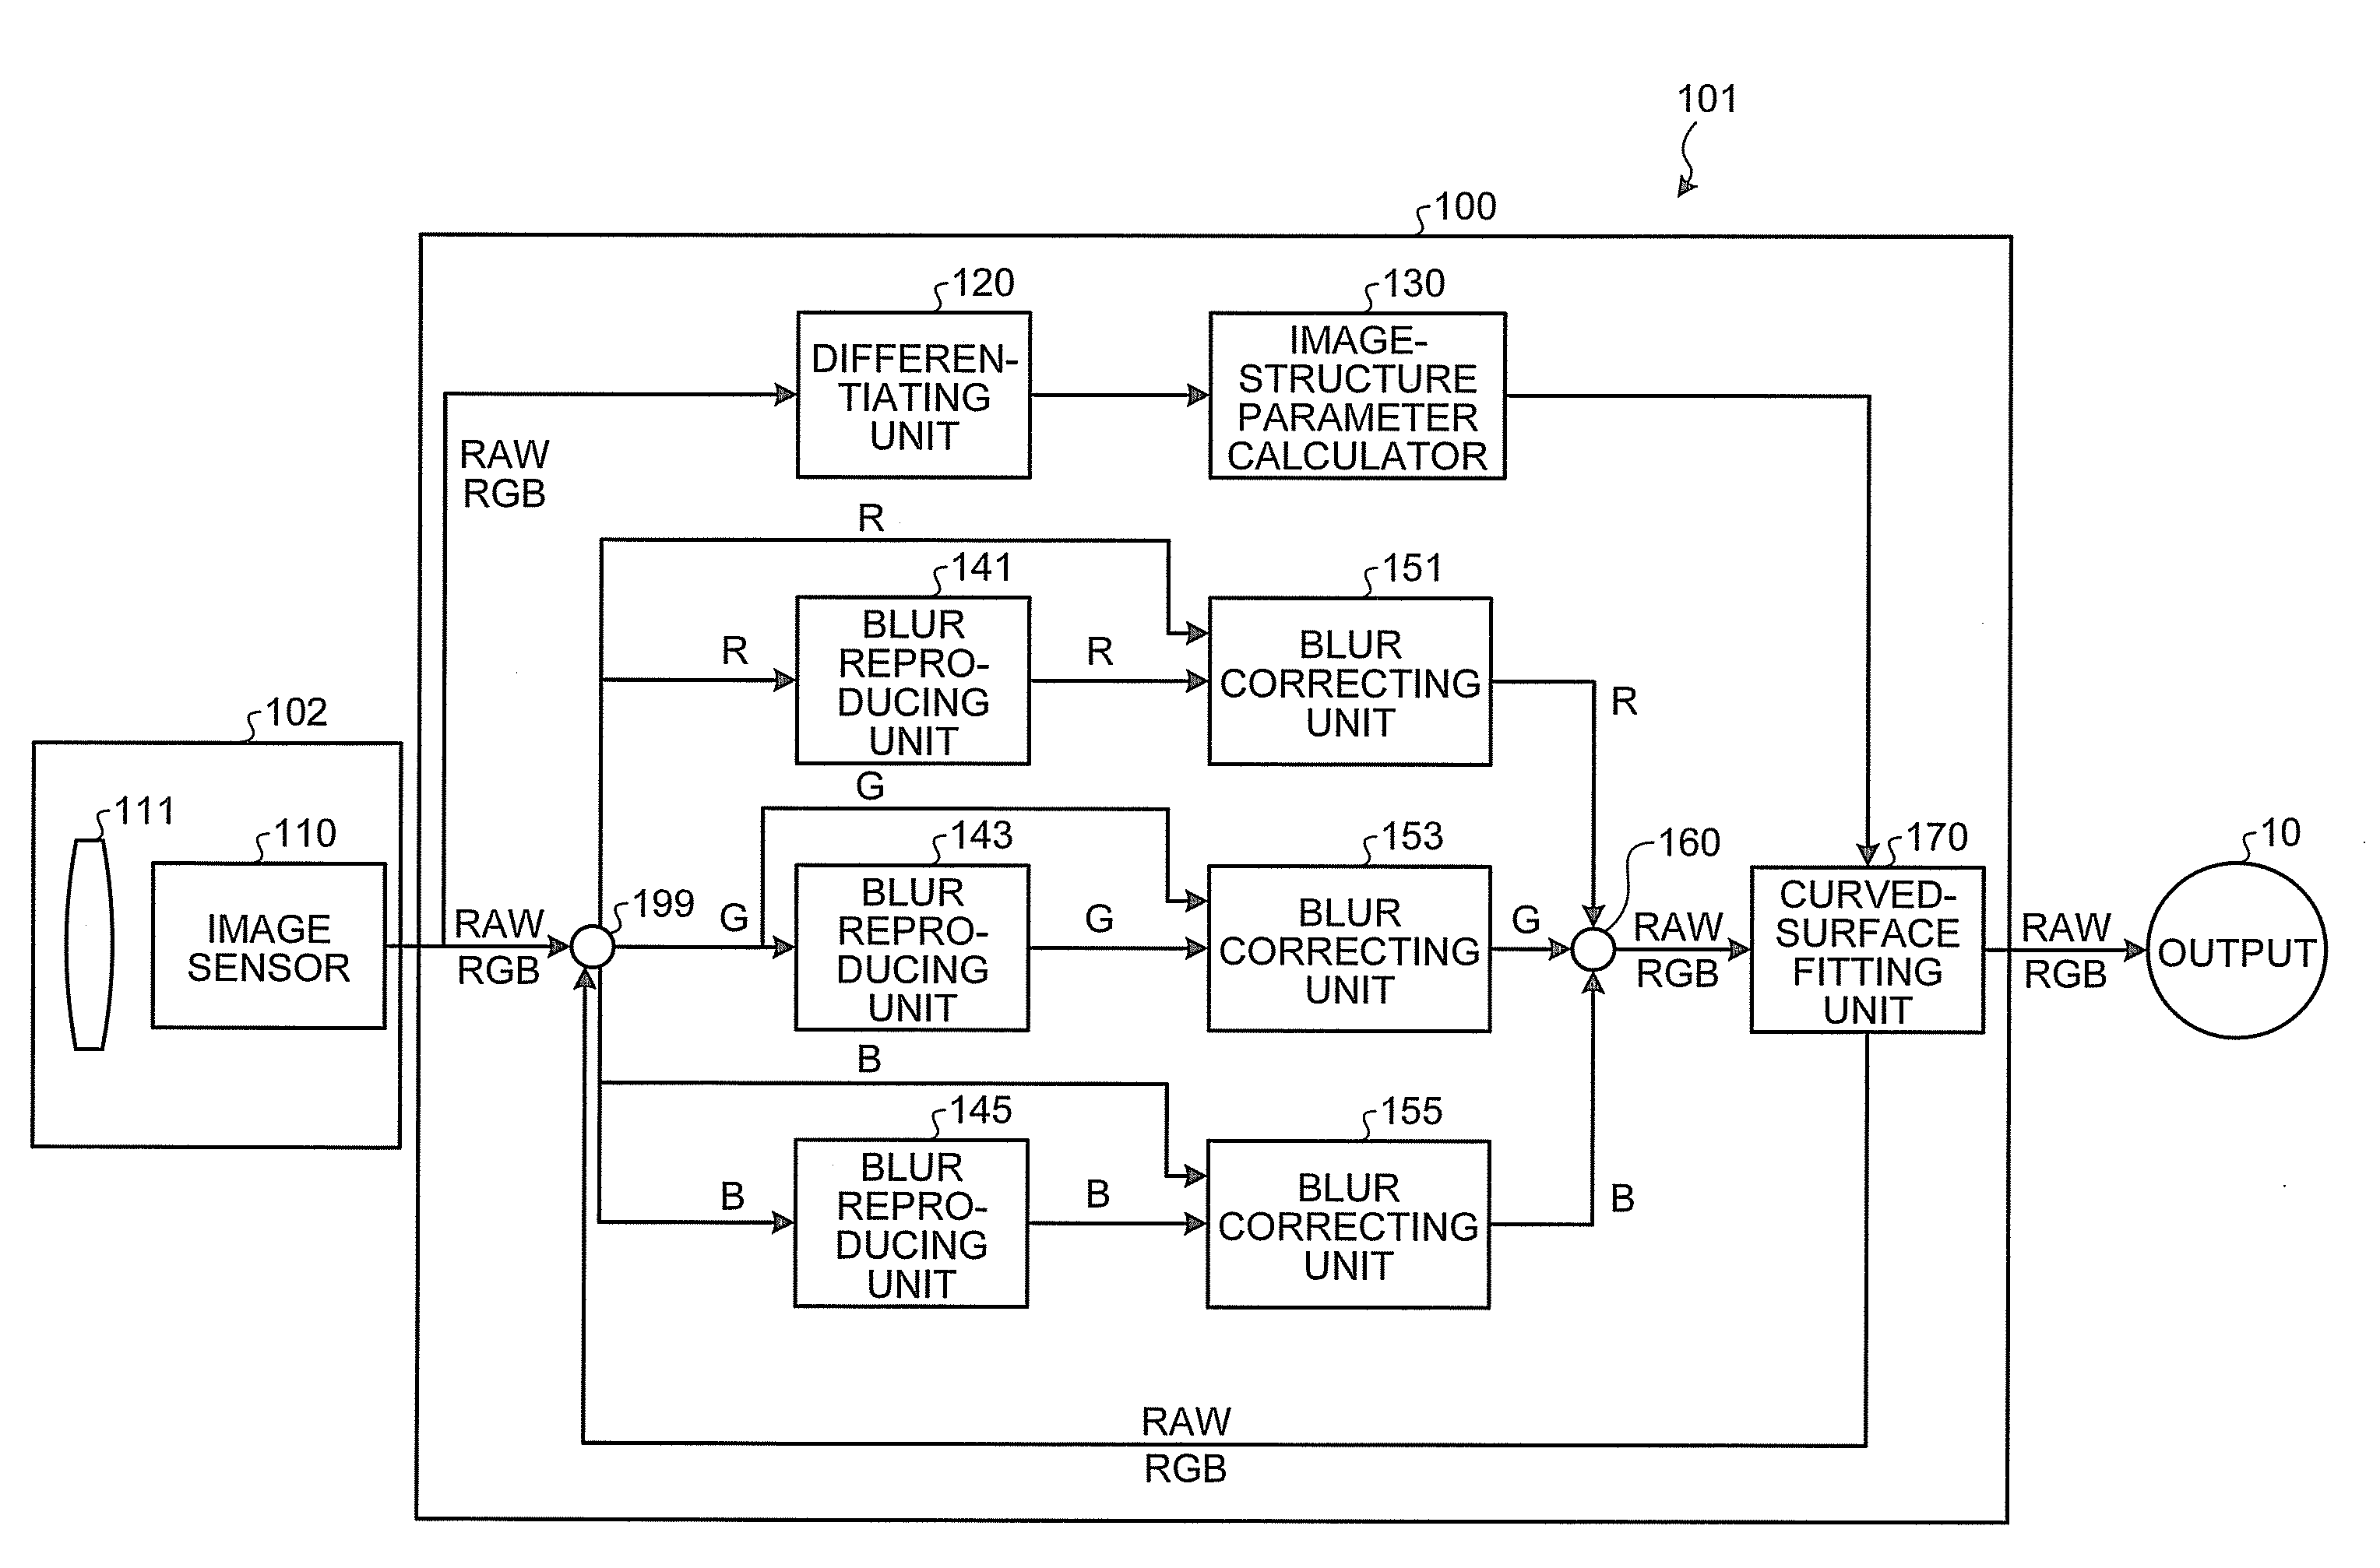 Image processing apparatus, imaging device, image processing method, and computer program product